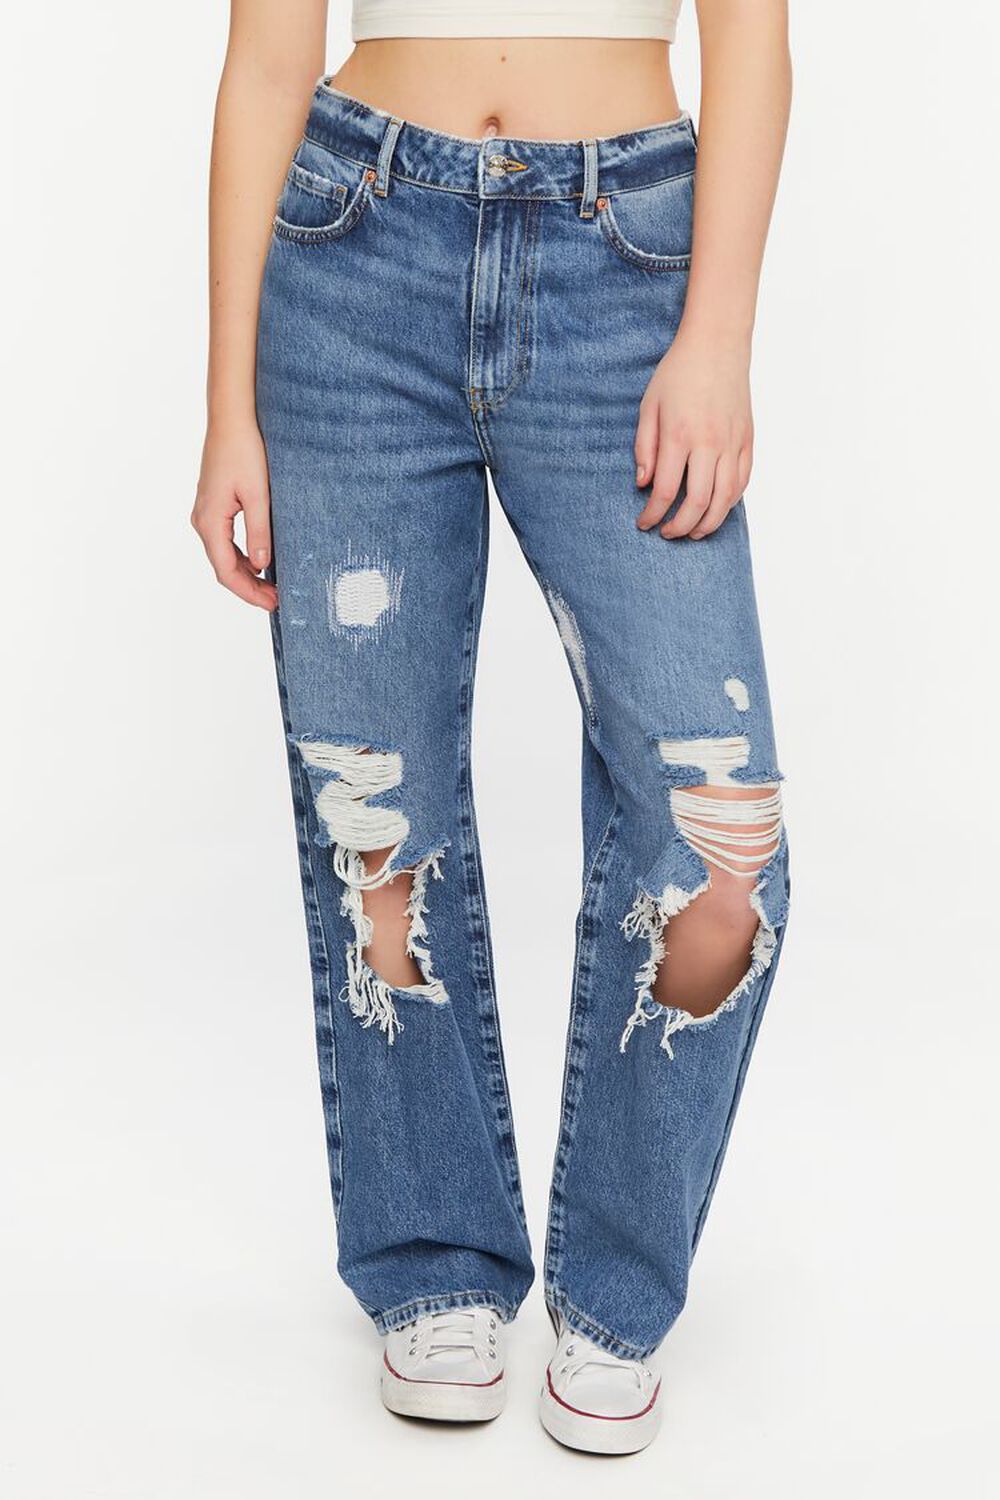 MEDIUM DENIM Recycled Cotton 90s-Fit Jeans, image 1